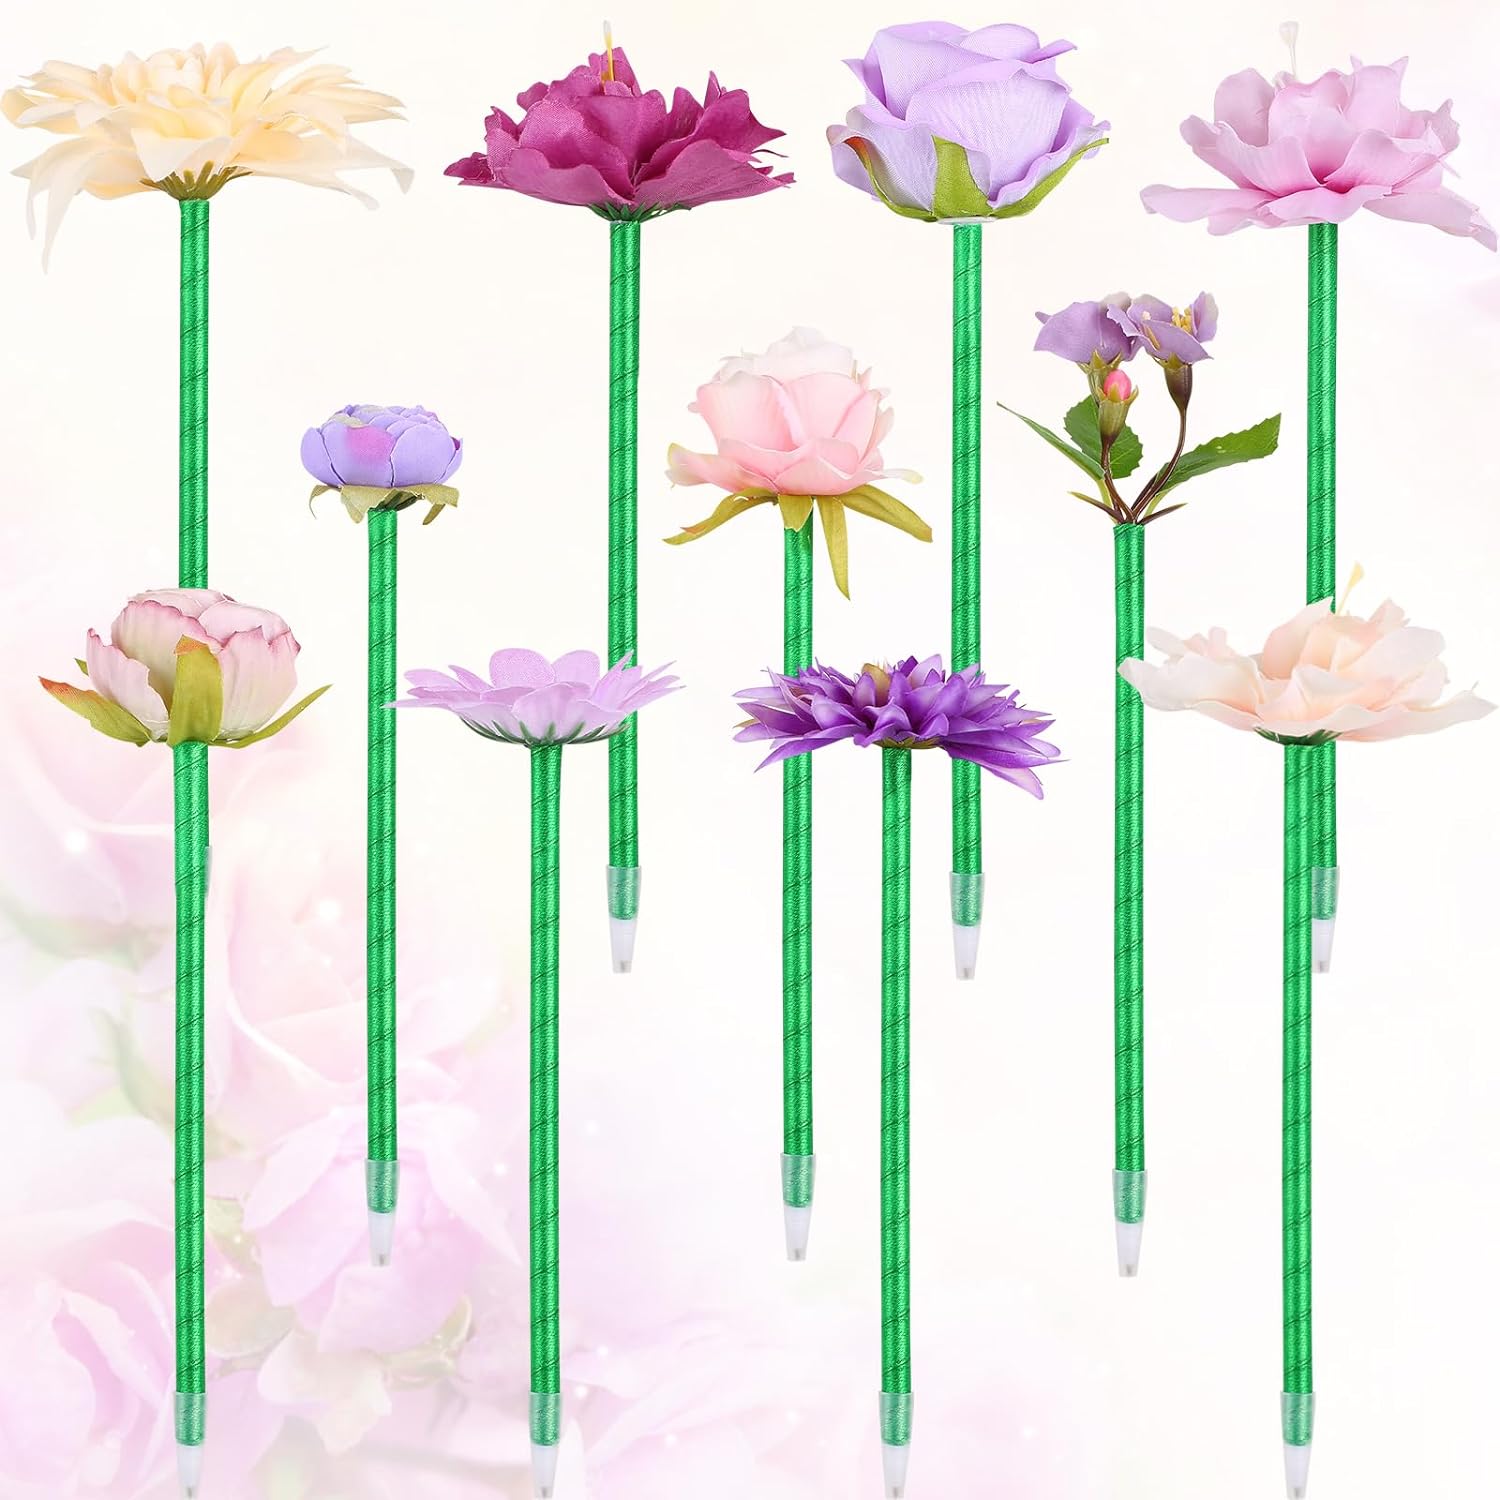 A set of pens with artificial flowers attached to the ends